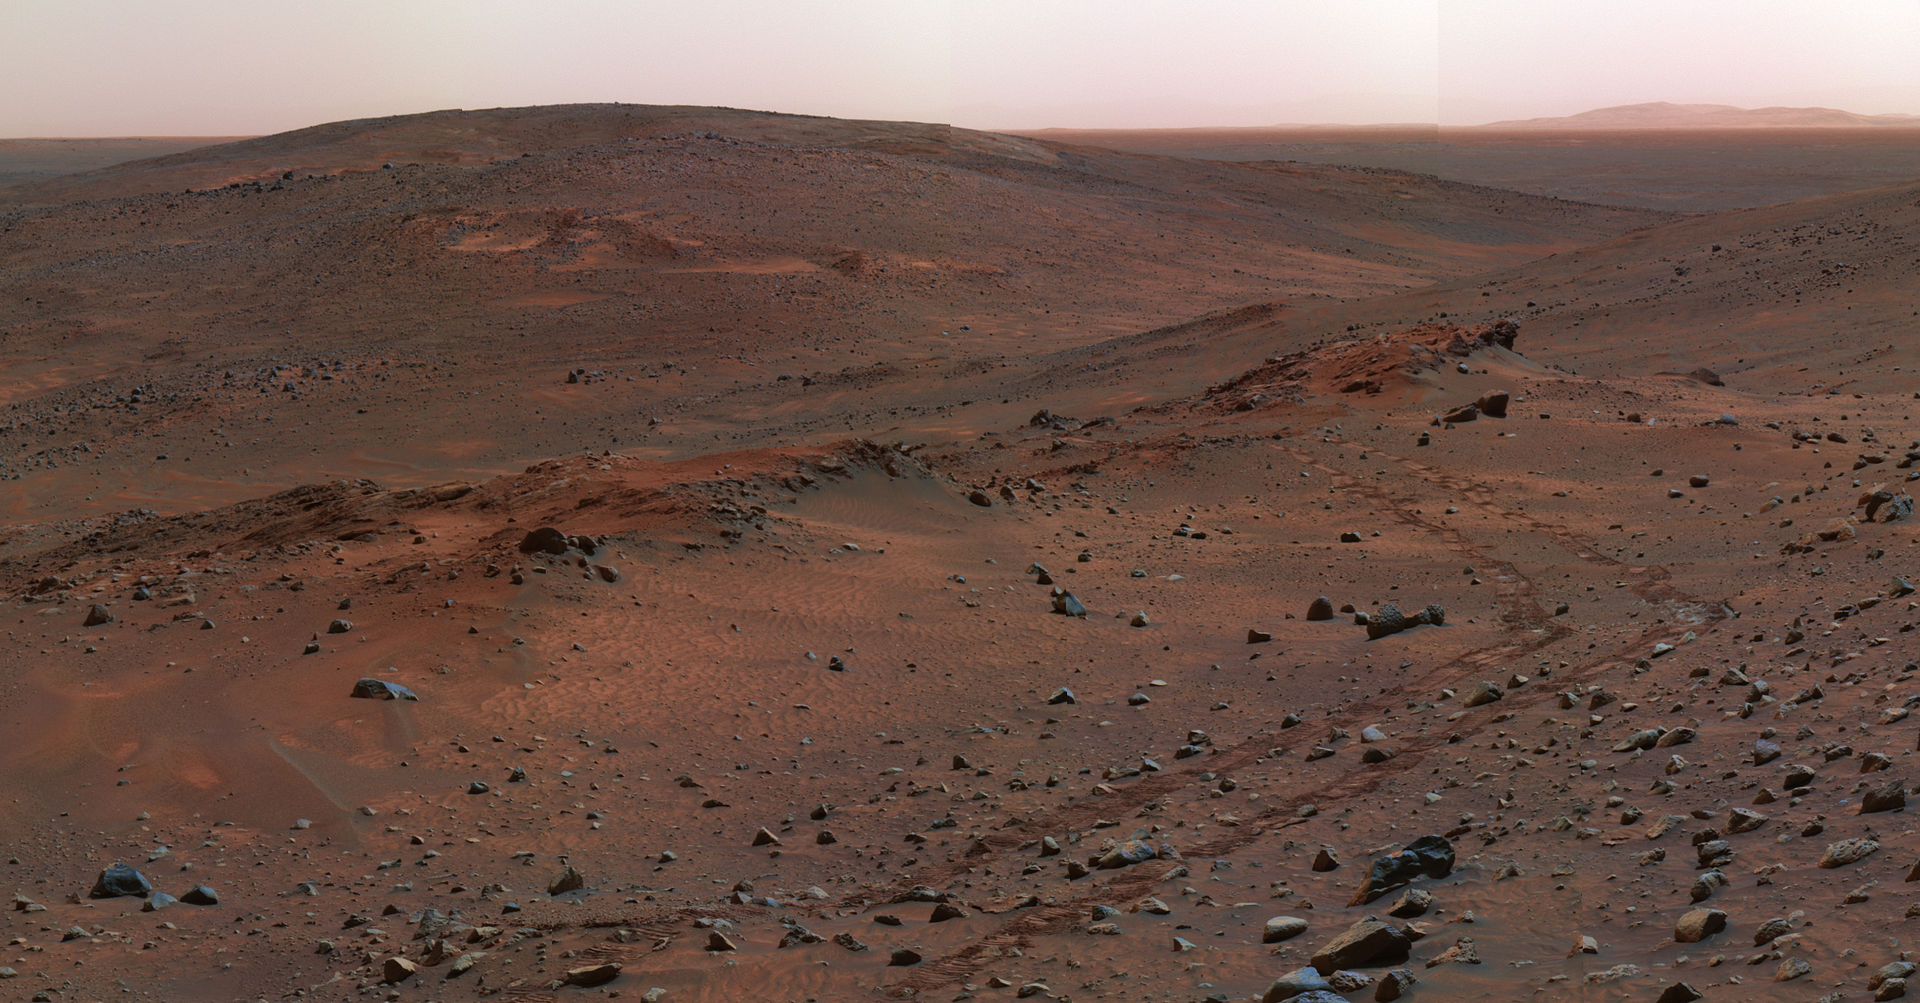 Panorama of the Gusev Crater on Mars